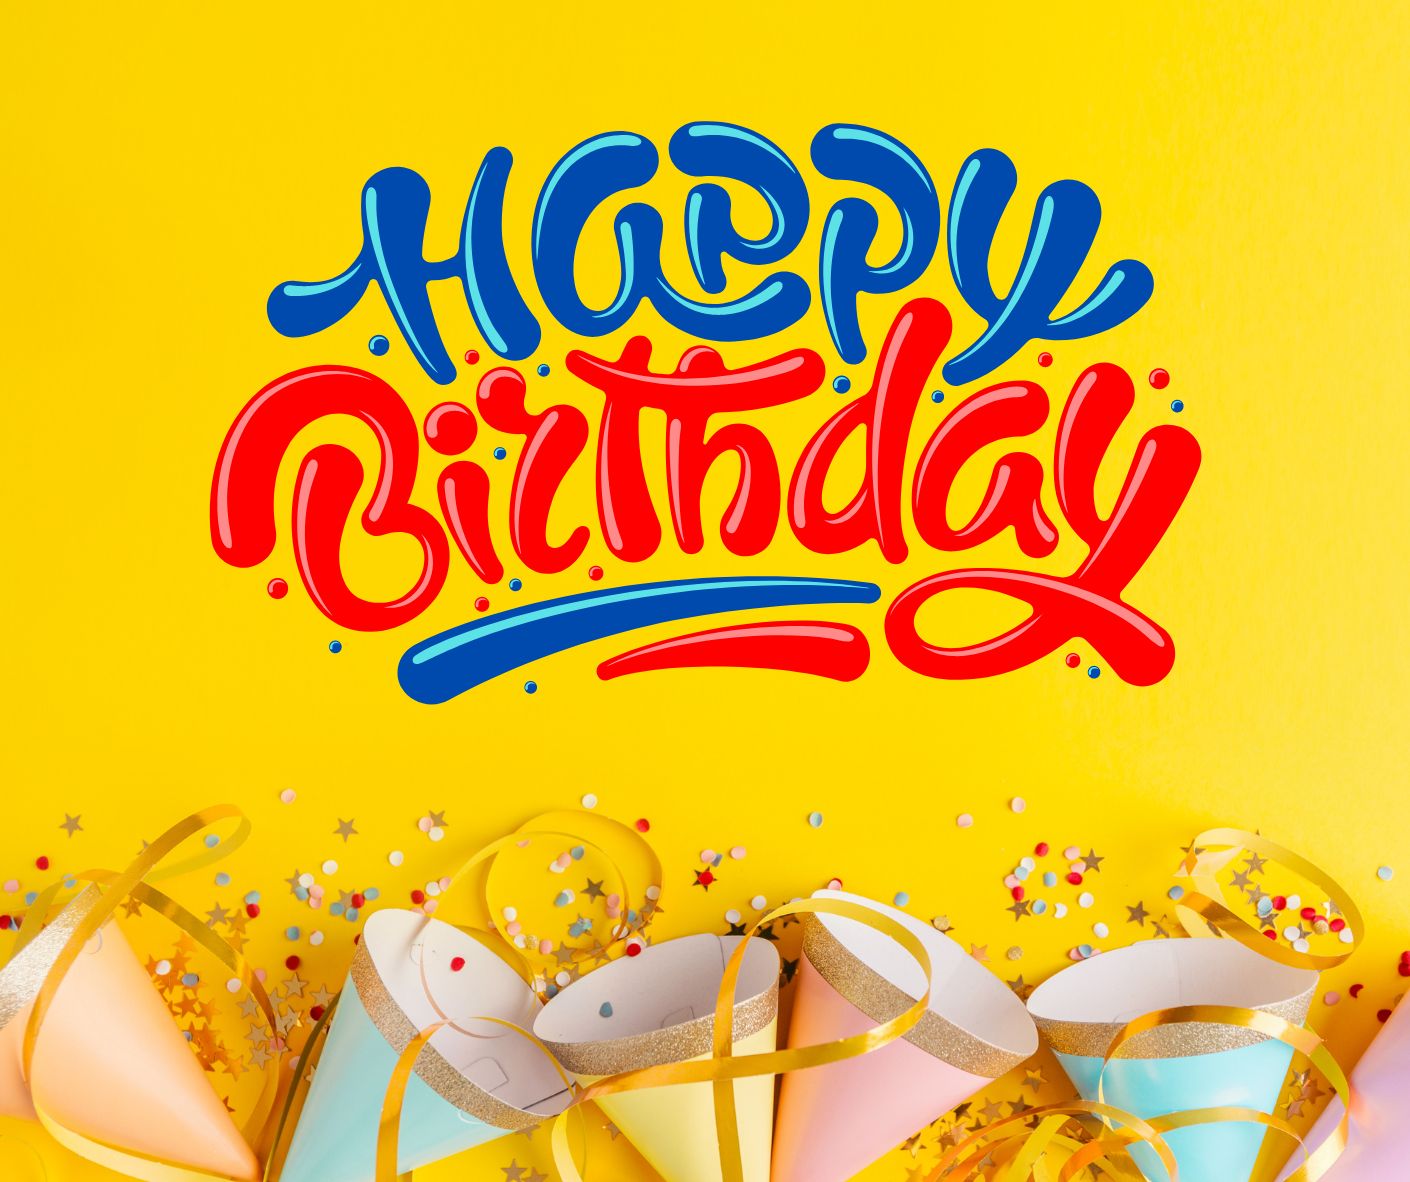 happy birthday messages with images and pictures